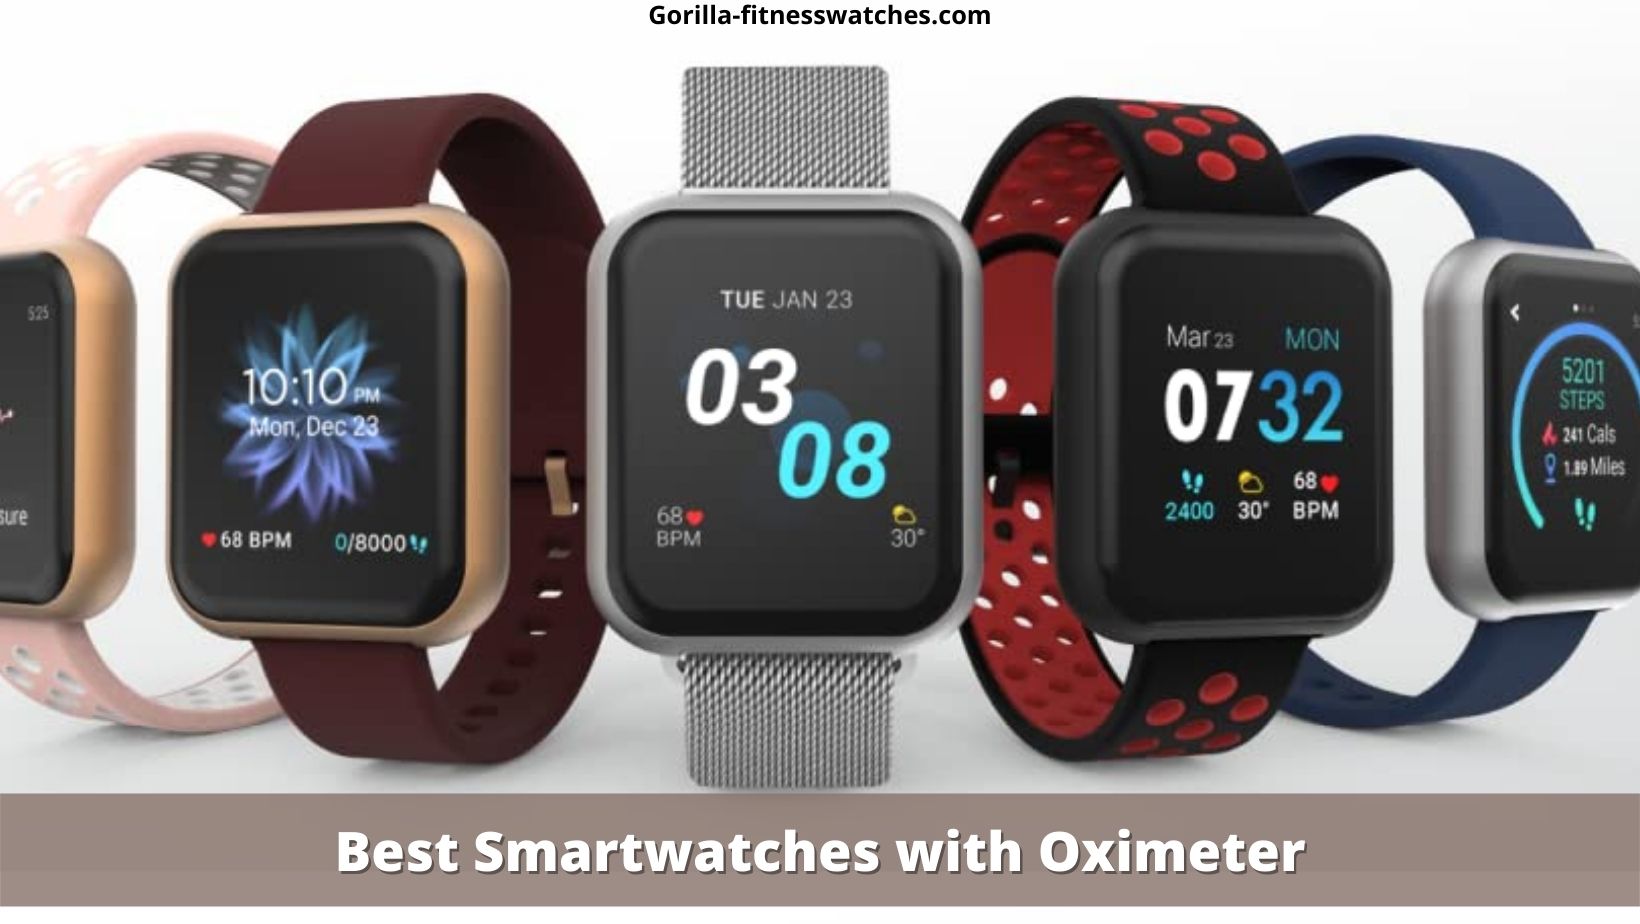 Best Smartwatches with Oximeter